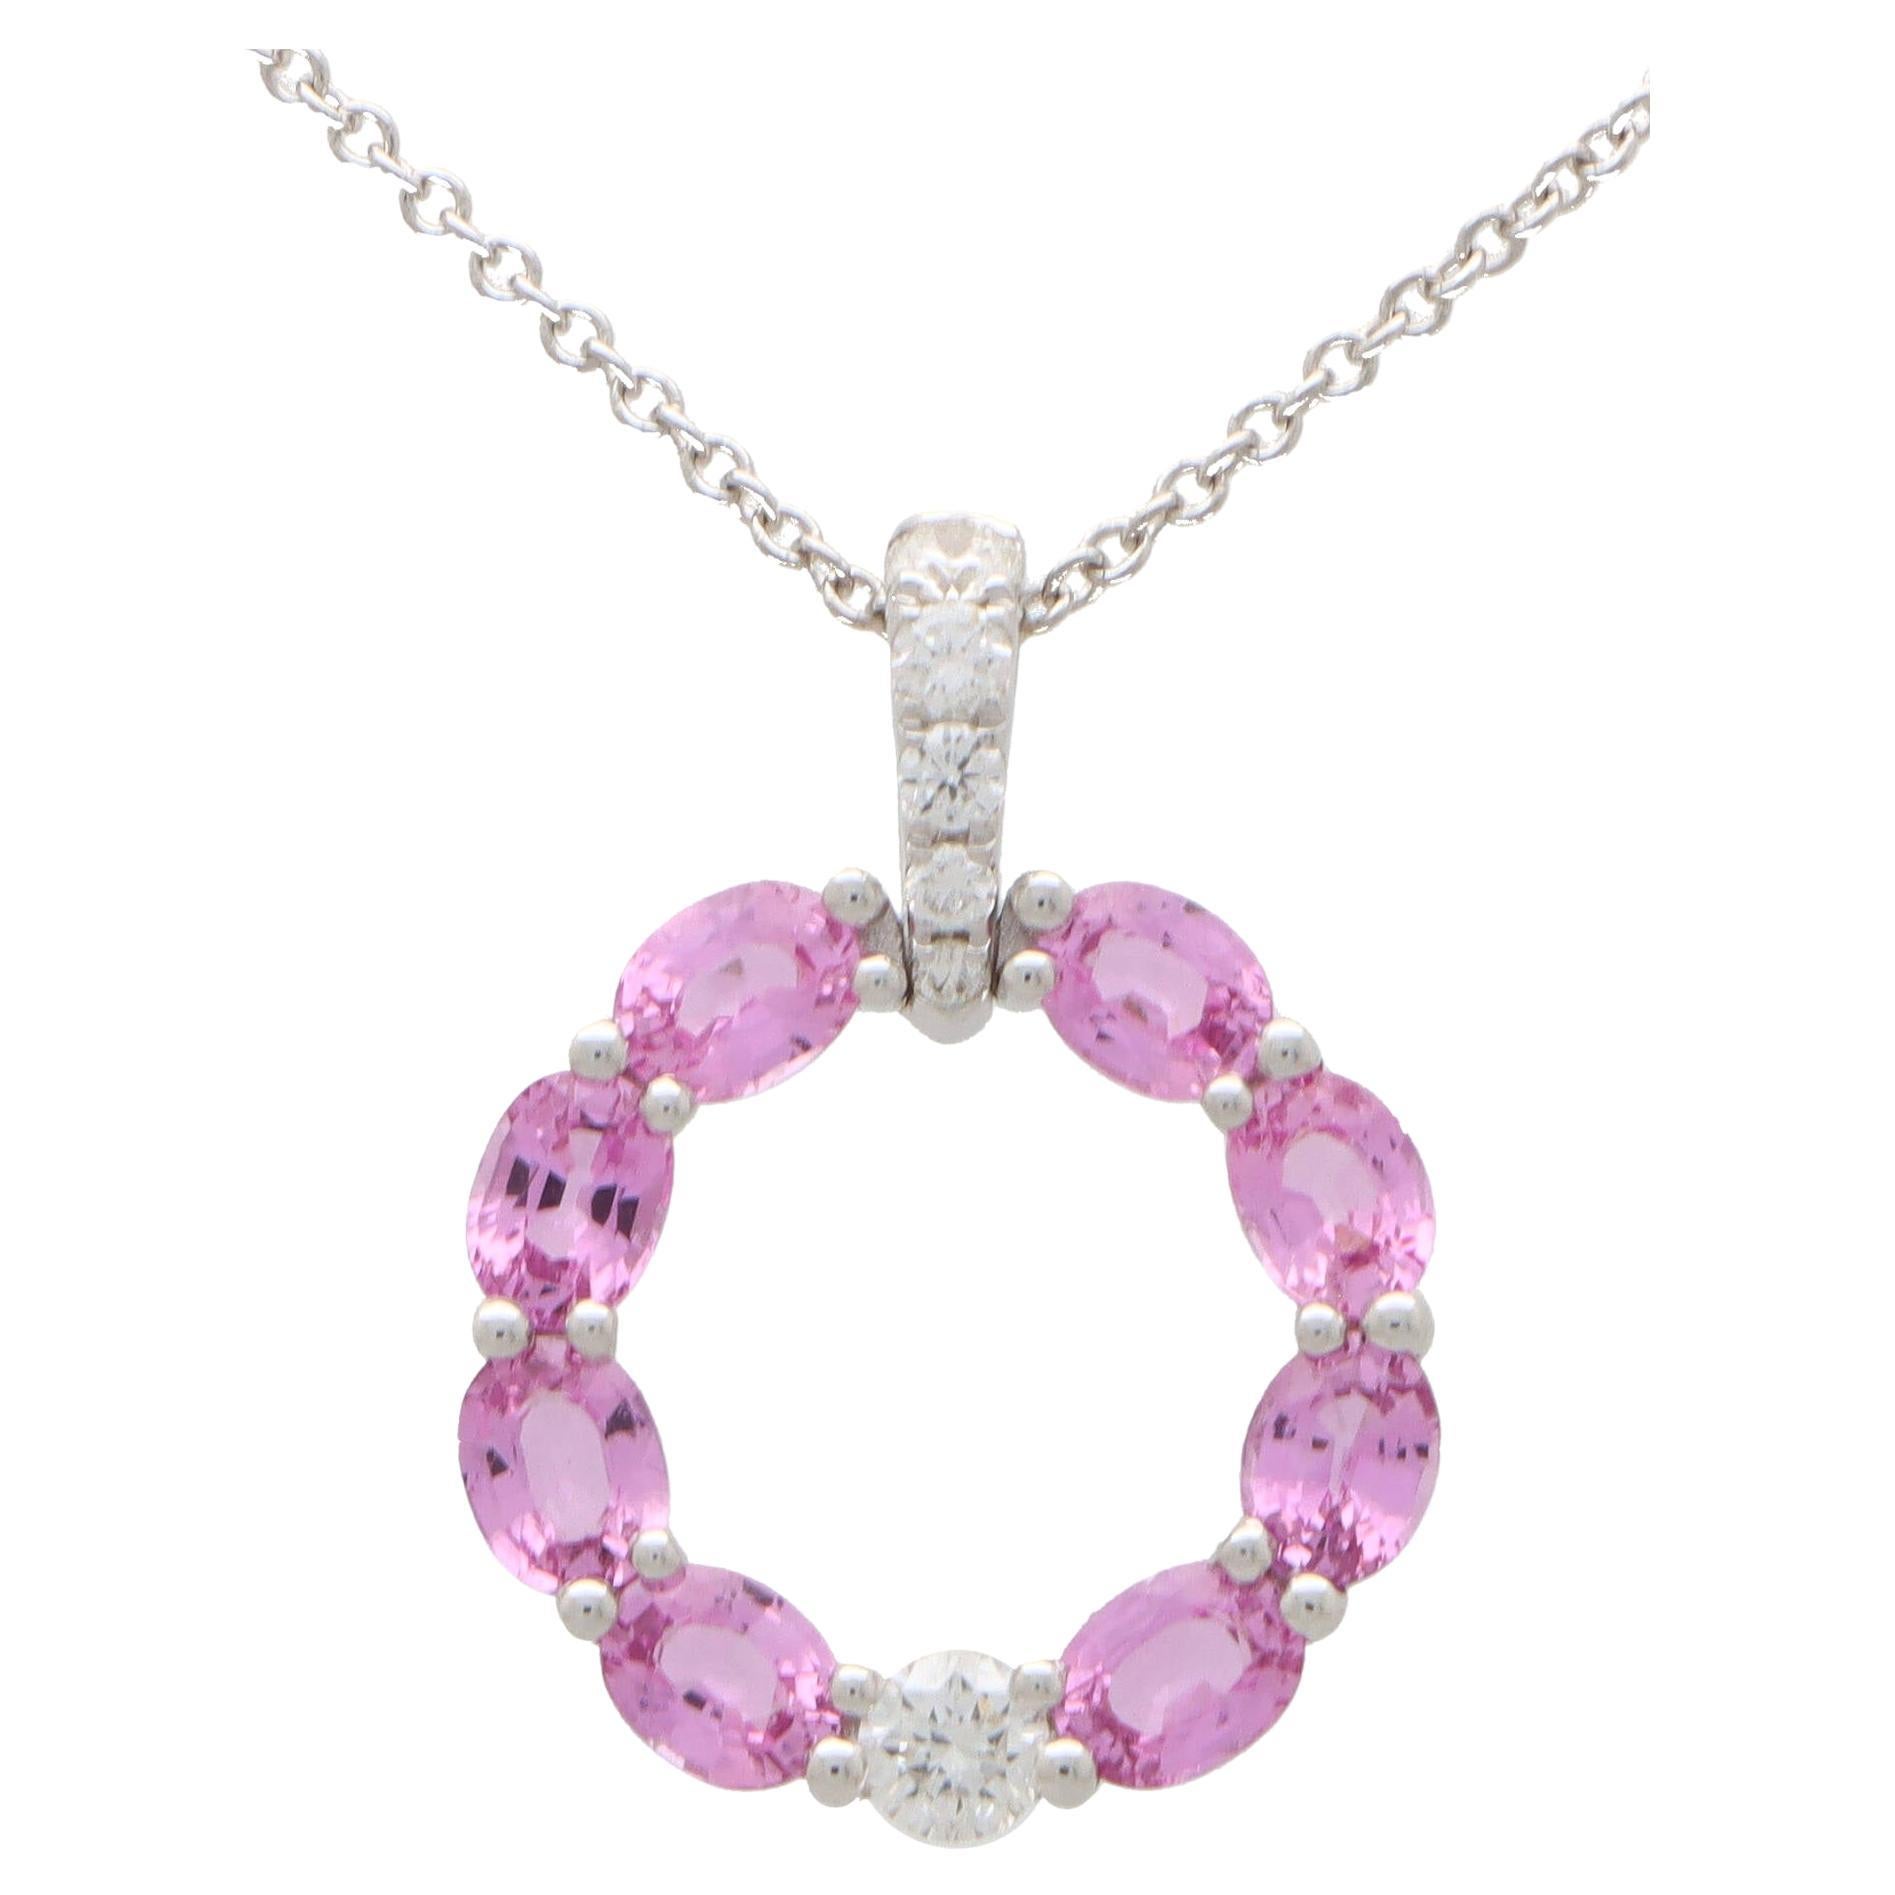 Contemporary Pastel Pink Sapphire and Diamond Pendant Necklace